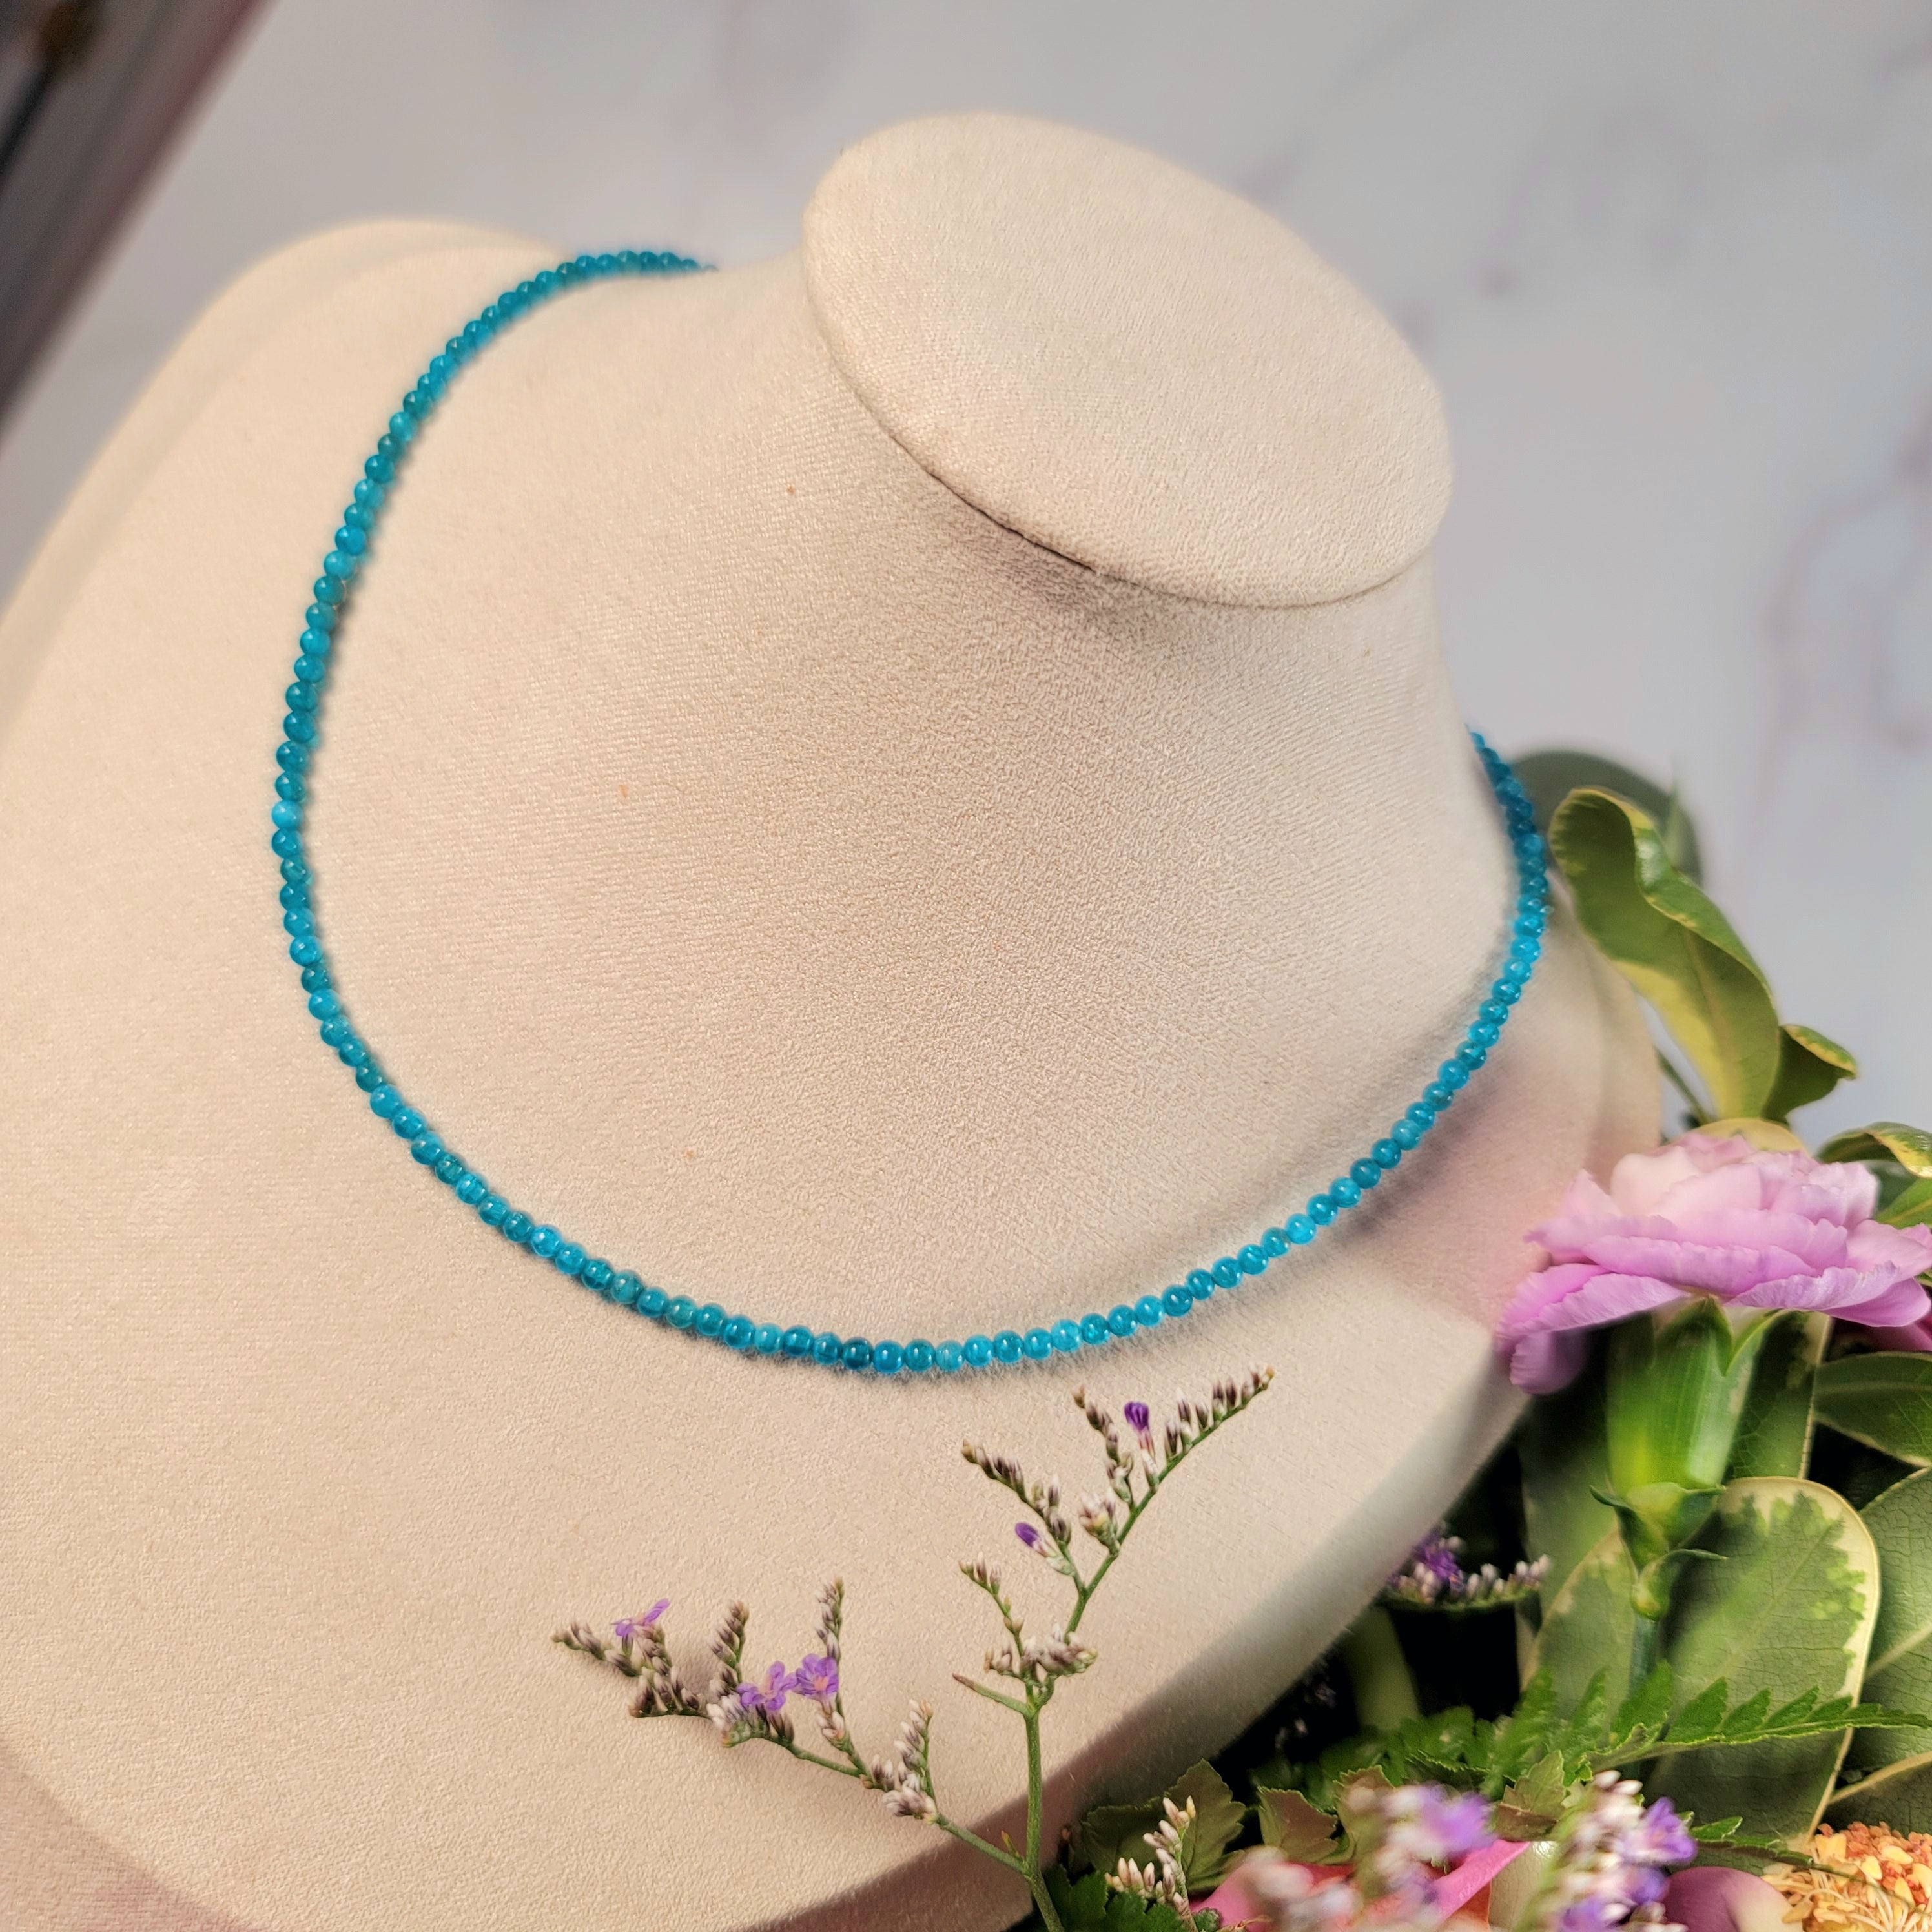 Blue Apatite Micro Round Choker/Layering Necklace for Promoting Clarity, Guidance & Unconditional Love